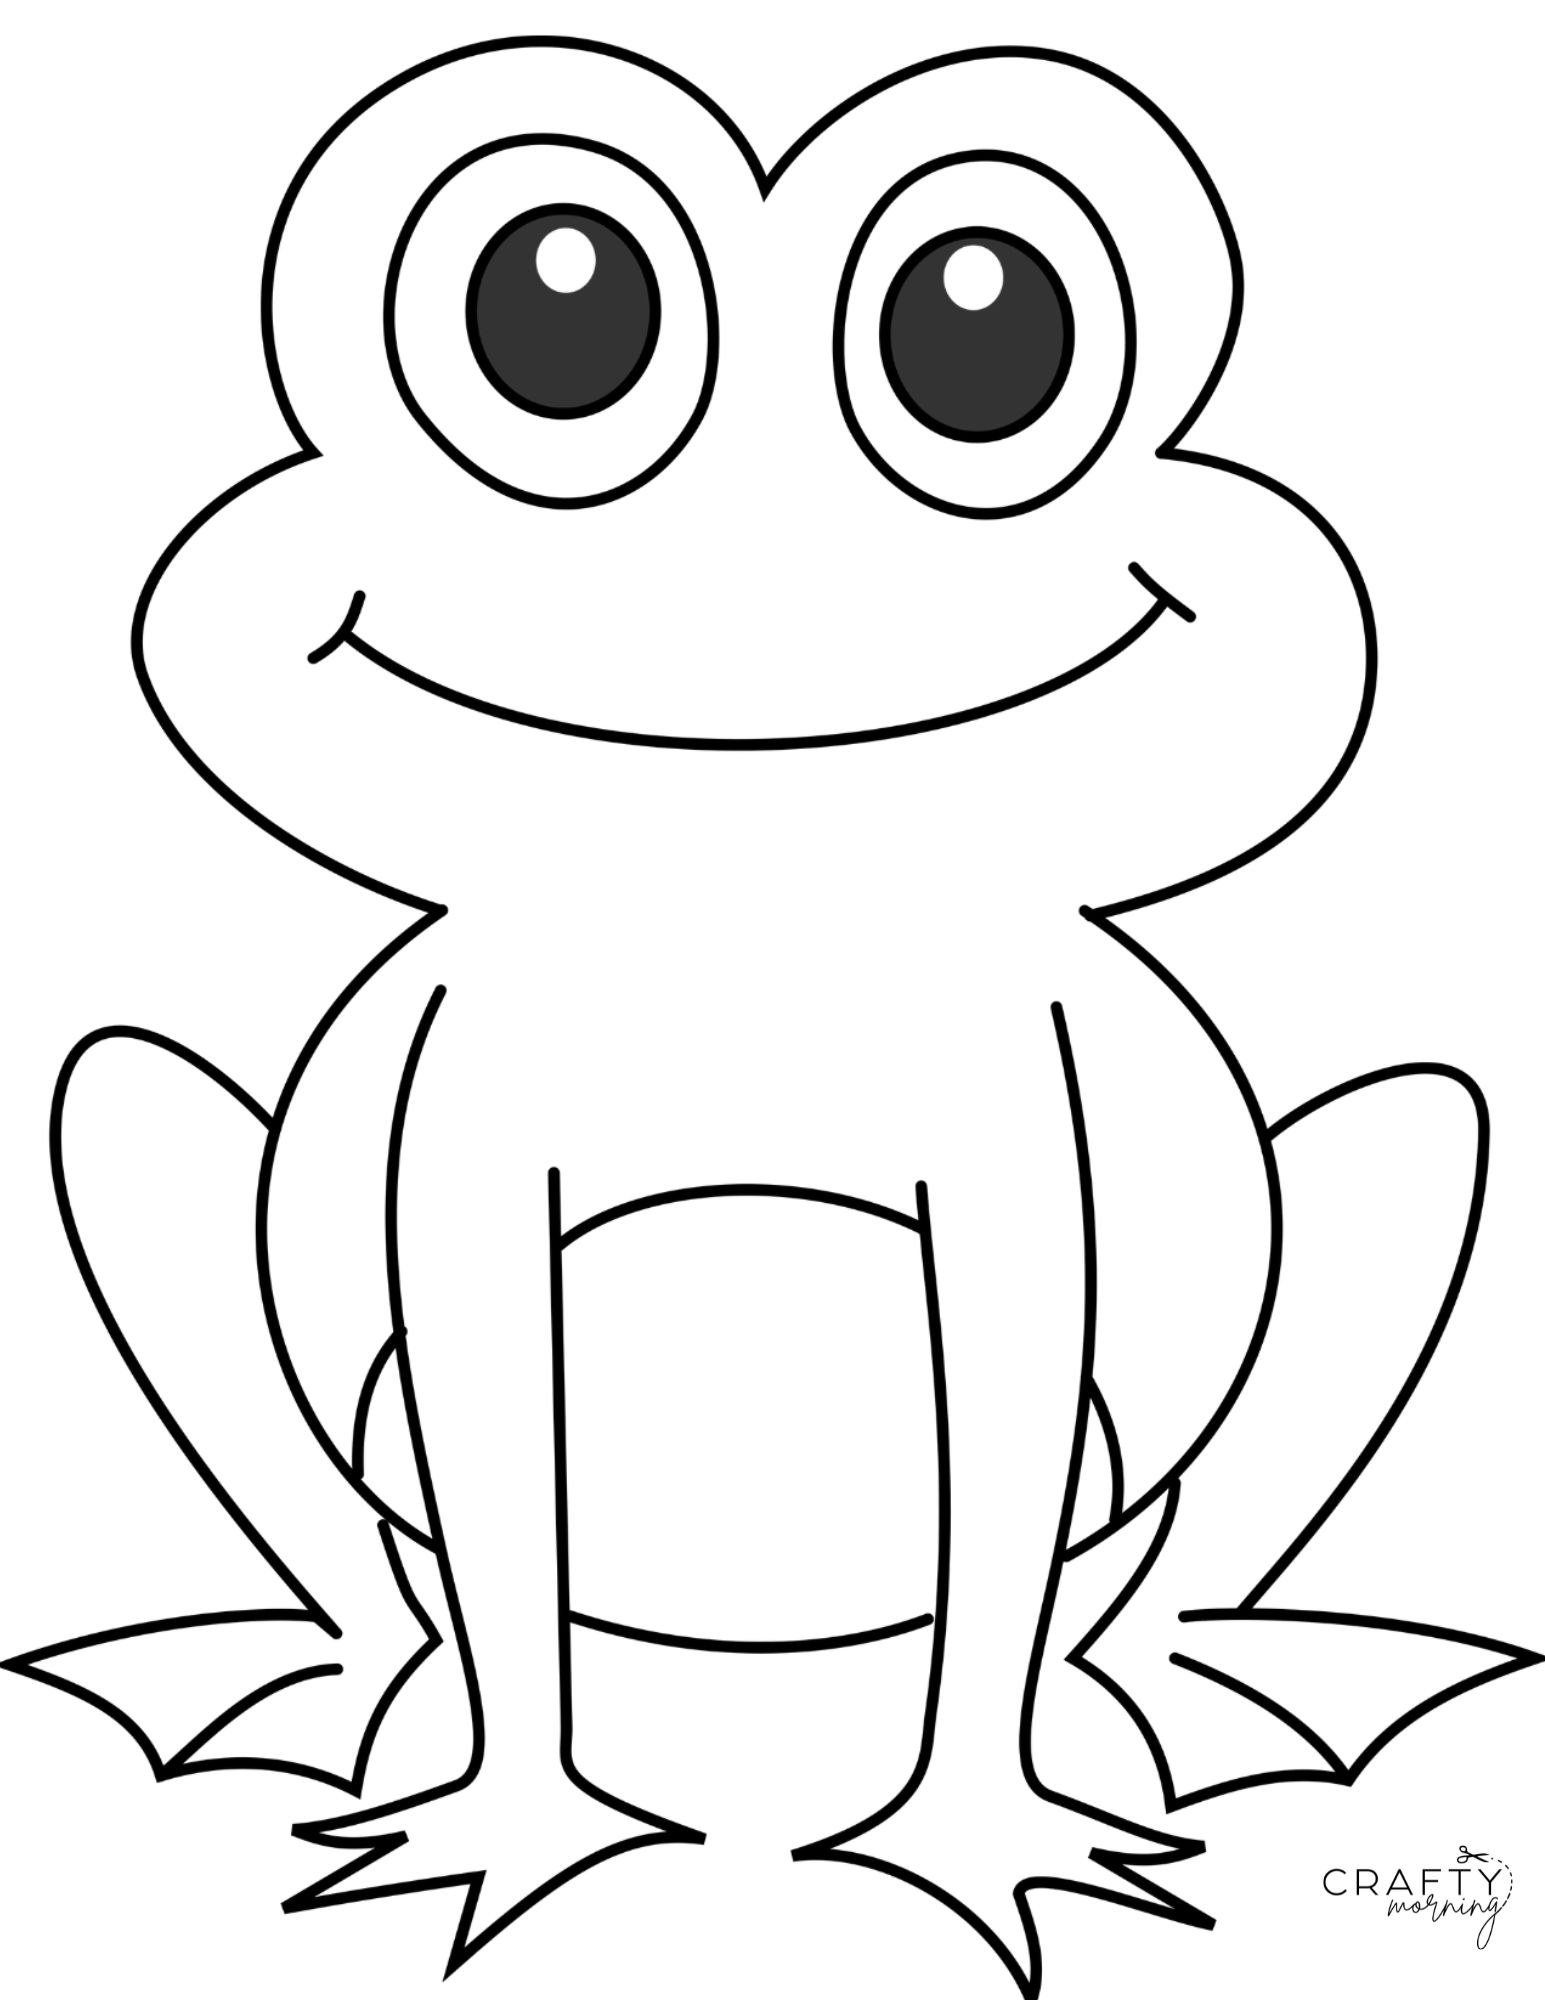 Frog drawing - How To Draw A Frog - PRB ARTS-saigonsouth.com.vn